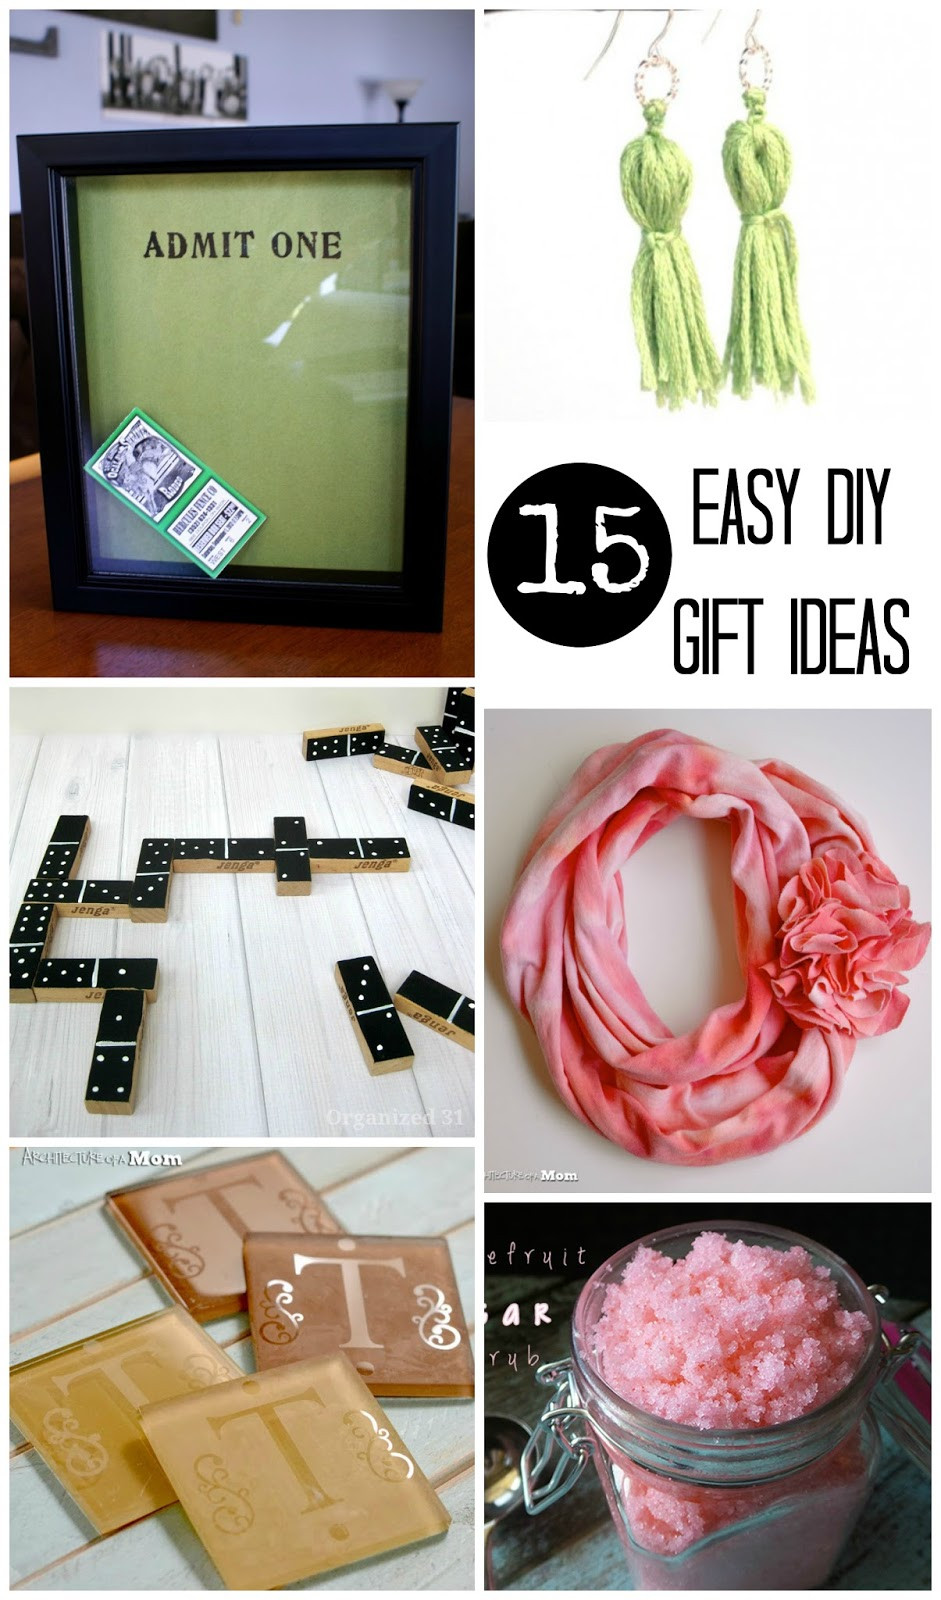 Easy DIY Gift Ideas
 Architecture of a Mom 15 Easy DIY Gift Ideas